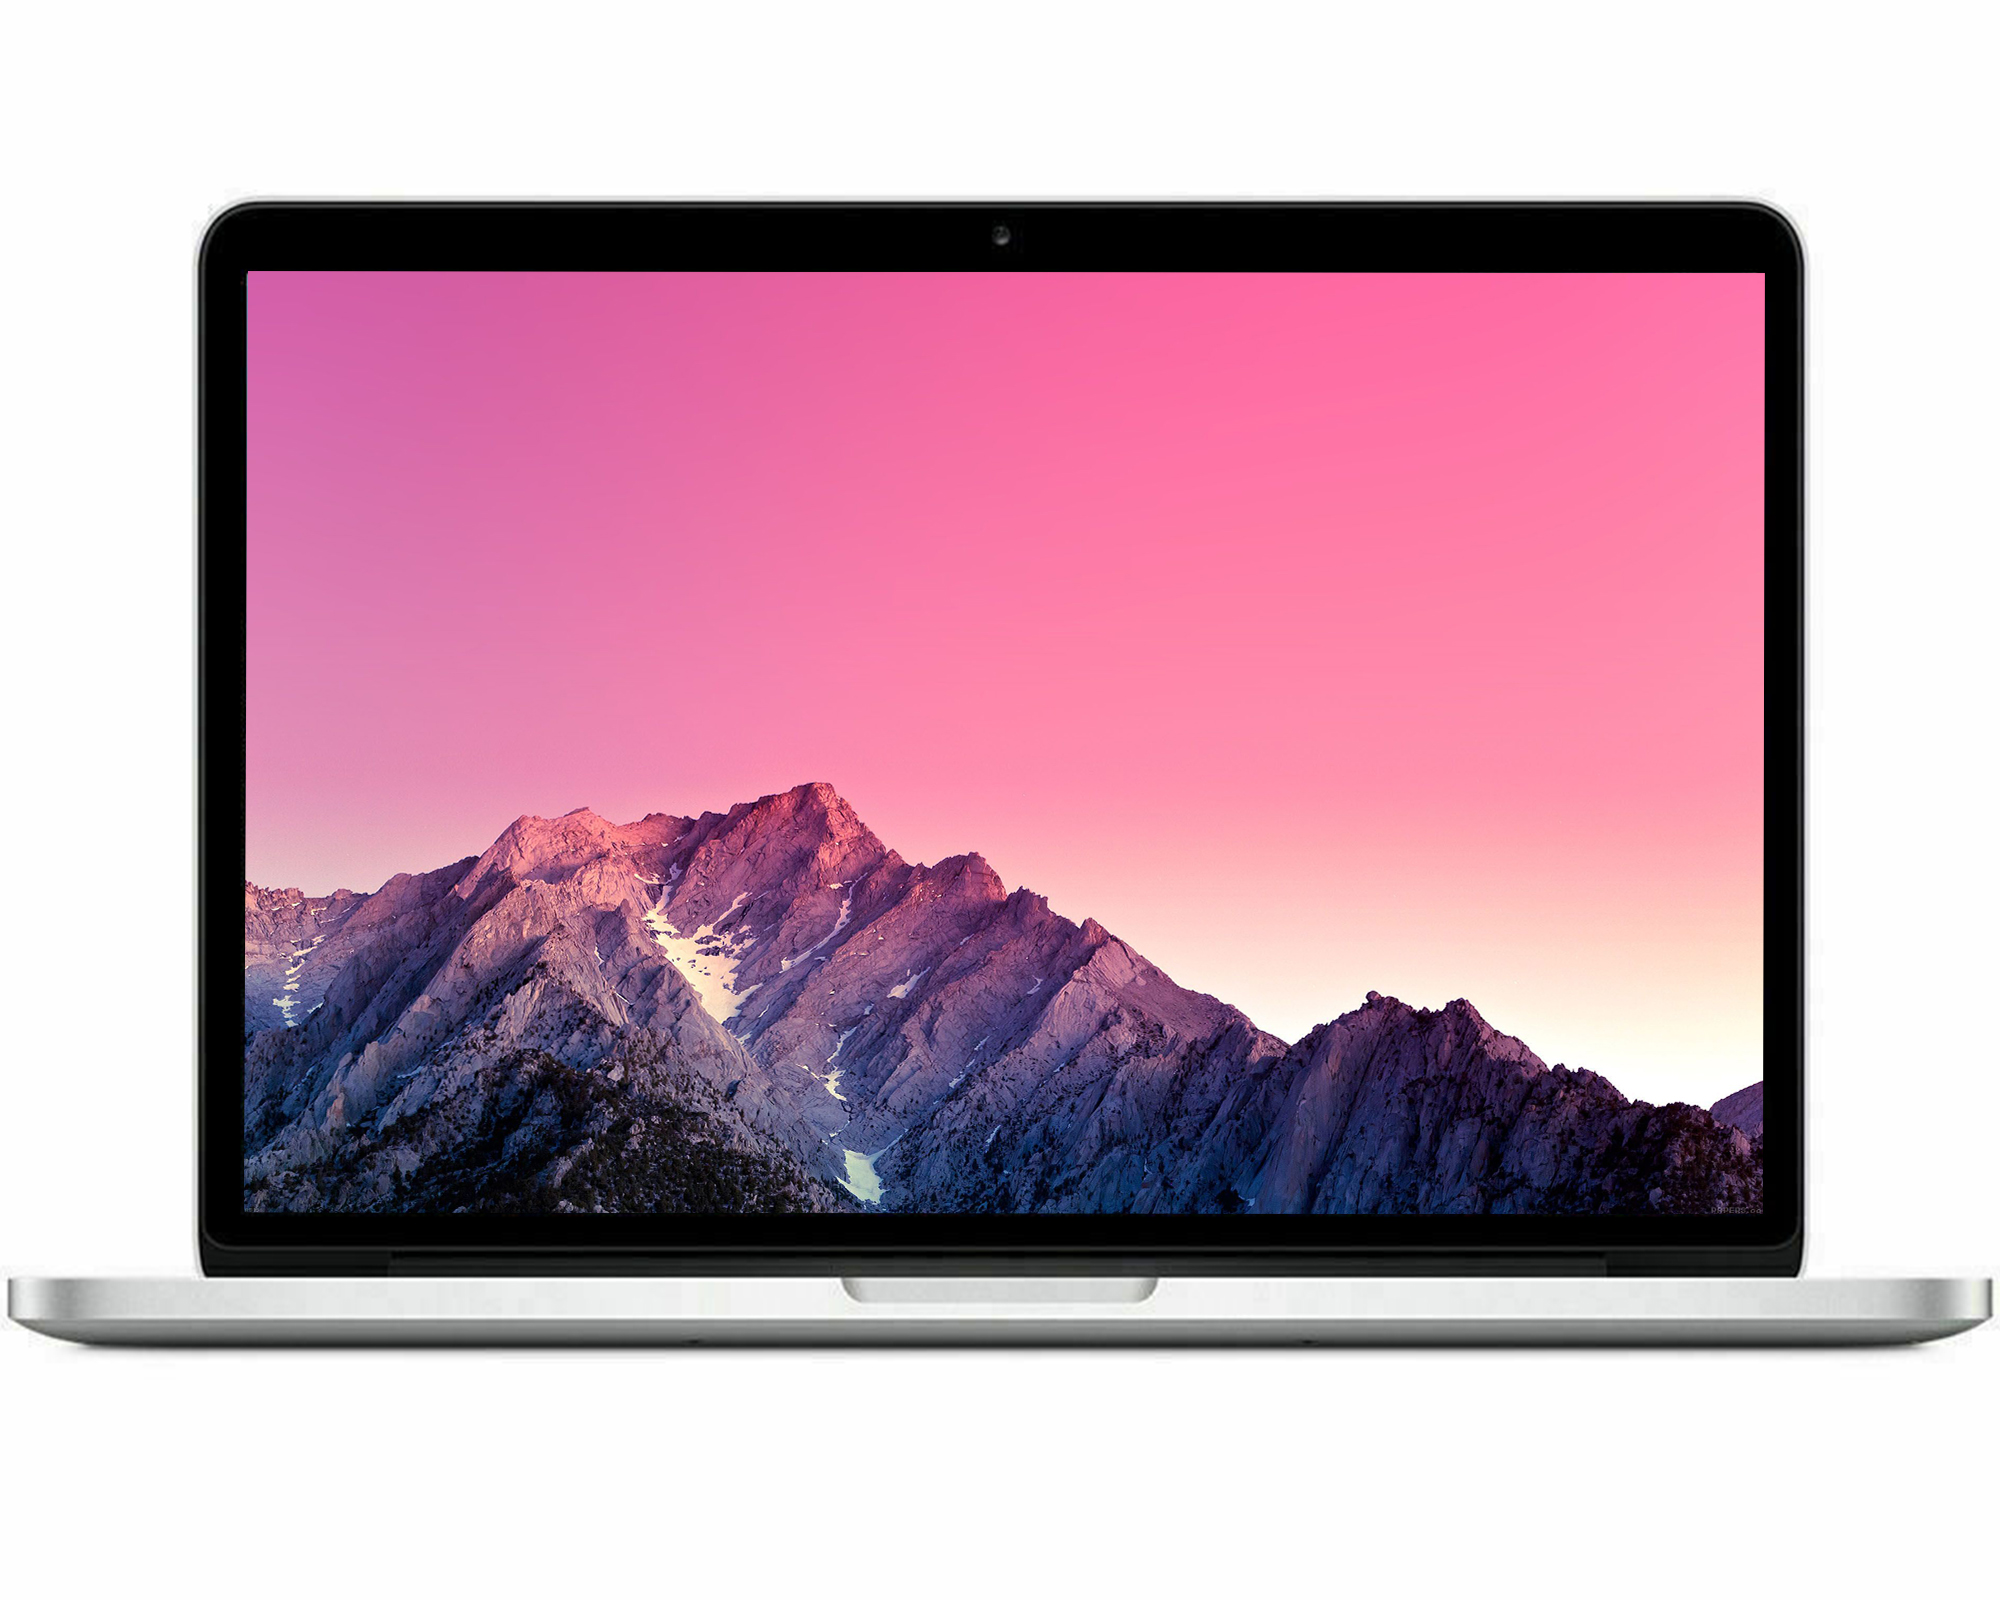 Restored | Apple MacBook Pro | 8GB RAM | 256GB SSD | 13.3-inch | Bundle: USA Essentials Bluetooth/Wireless Airbuds, Black Case, Wireless Mouse By Certified 2 Day Express - image 5 of 5